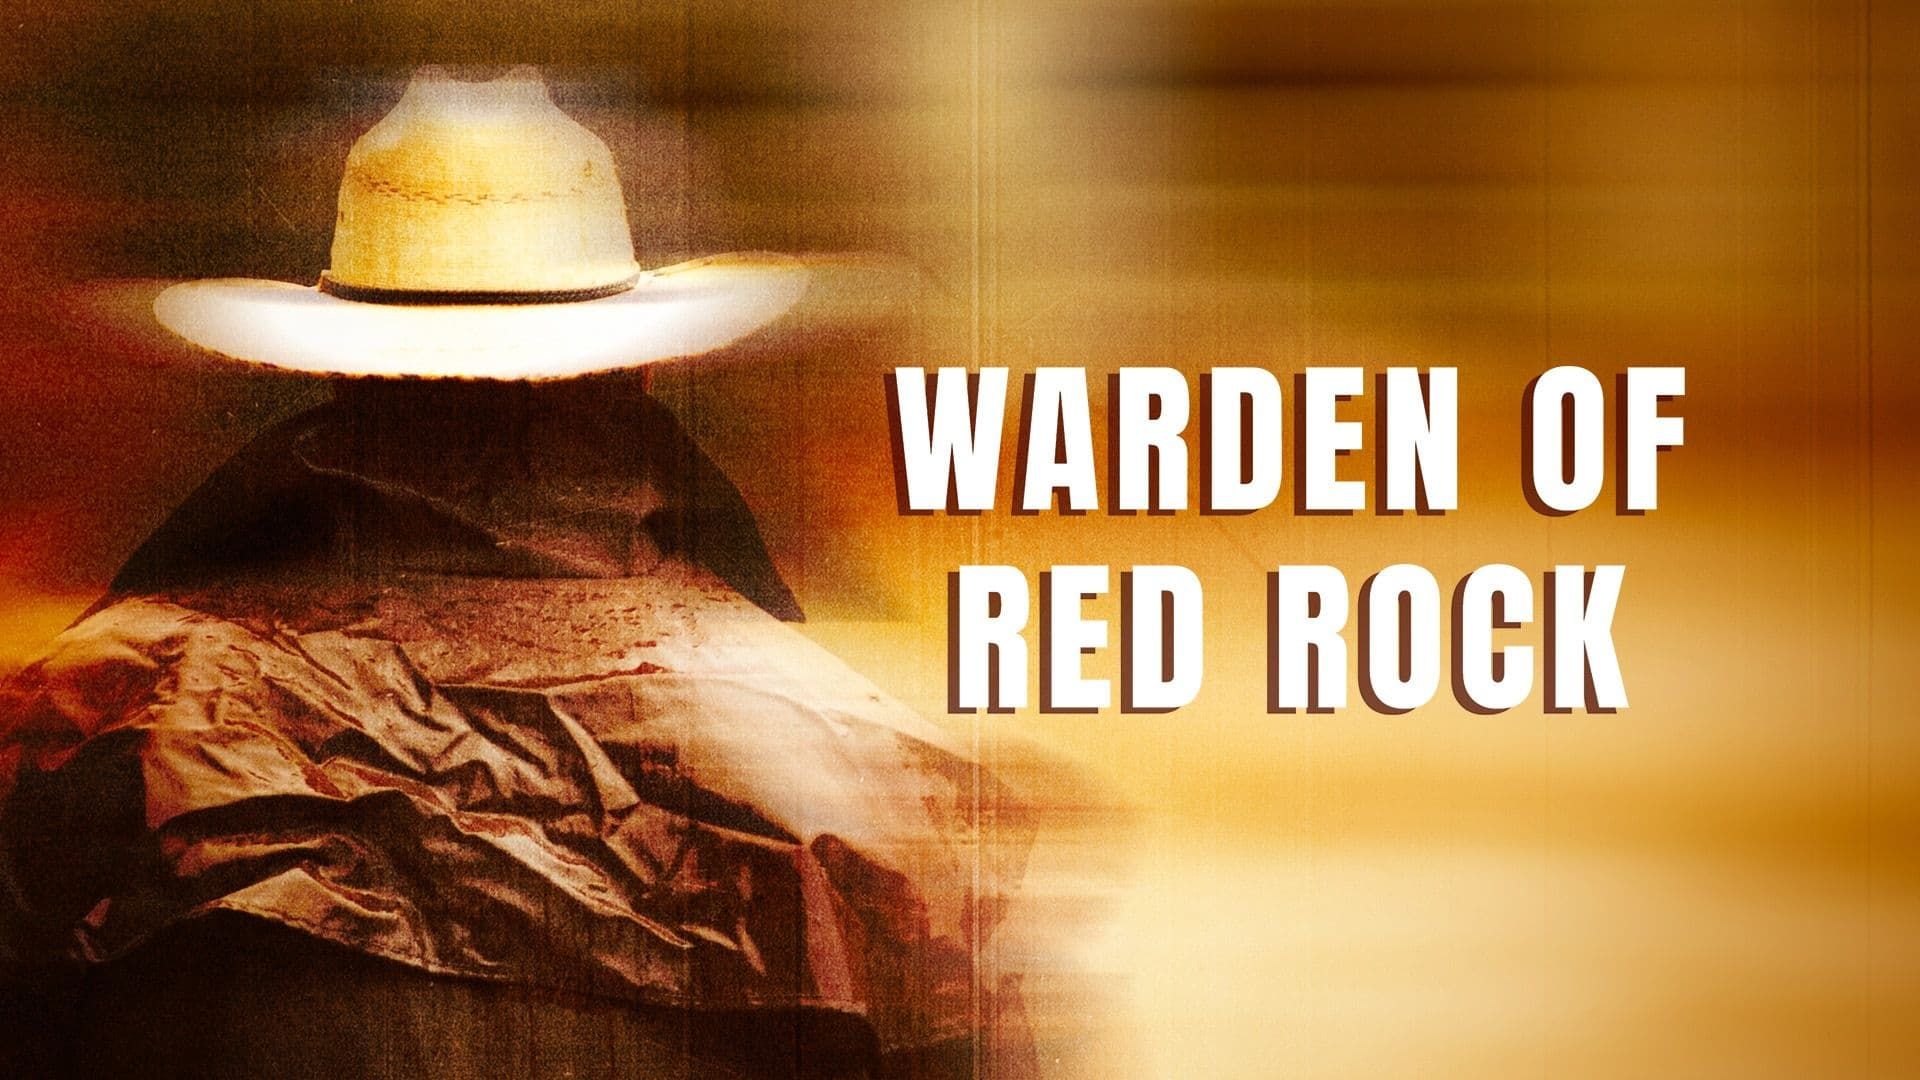 Warden of Red Rock background